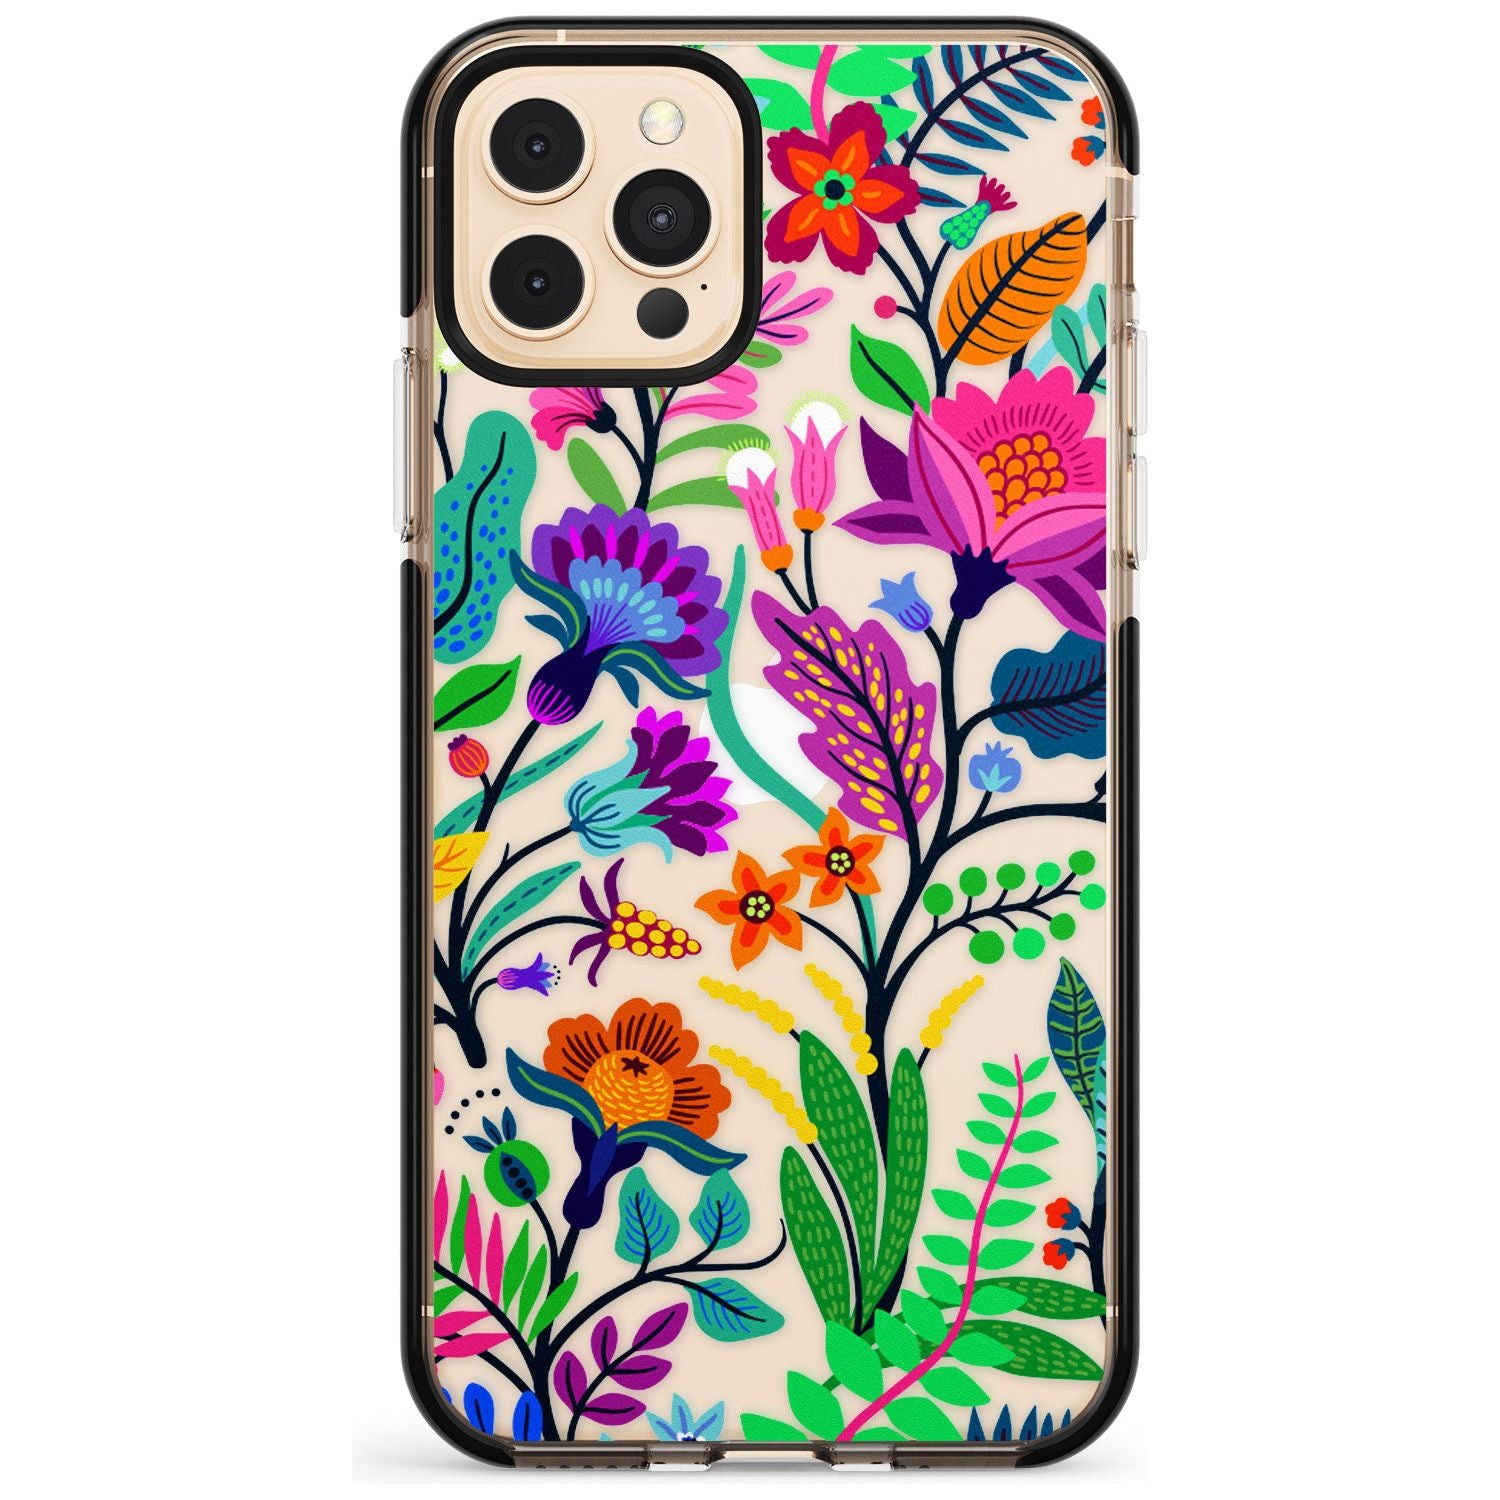 Floral Vibe Black Impact Phone Case for iPhone 11